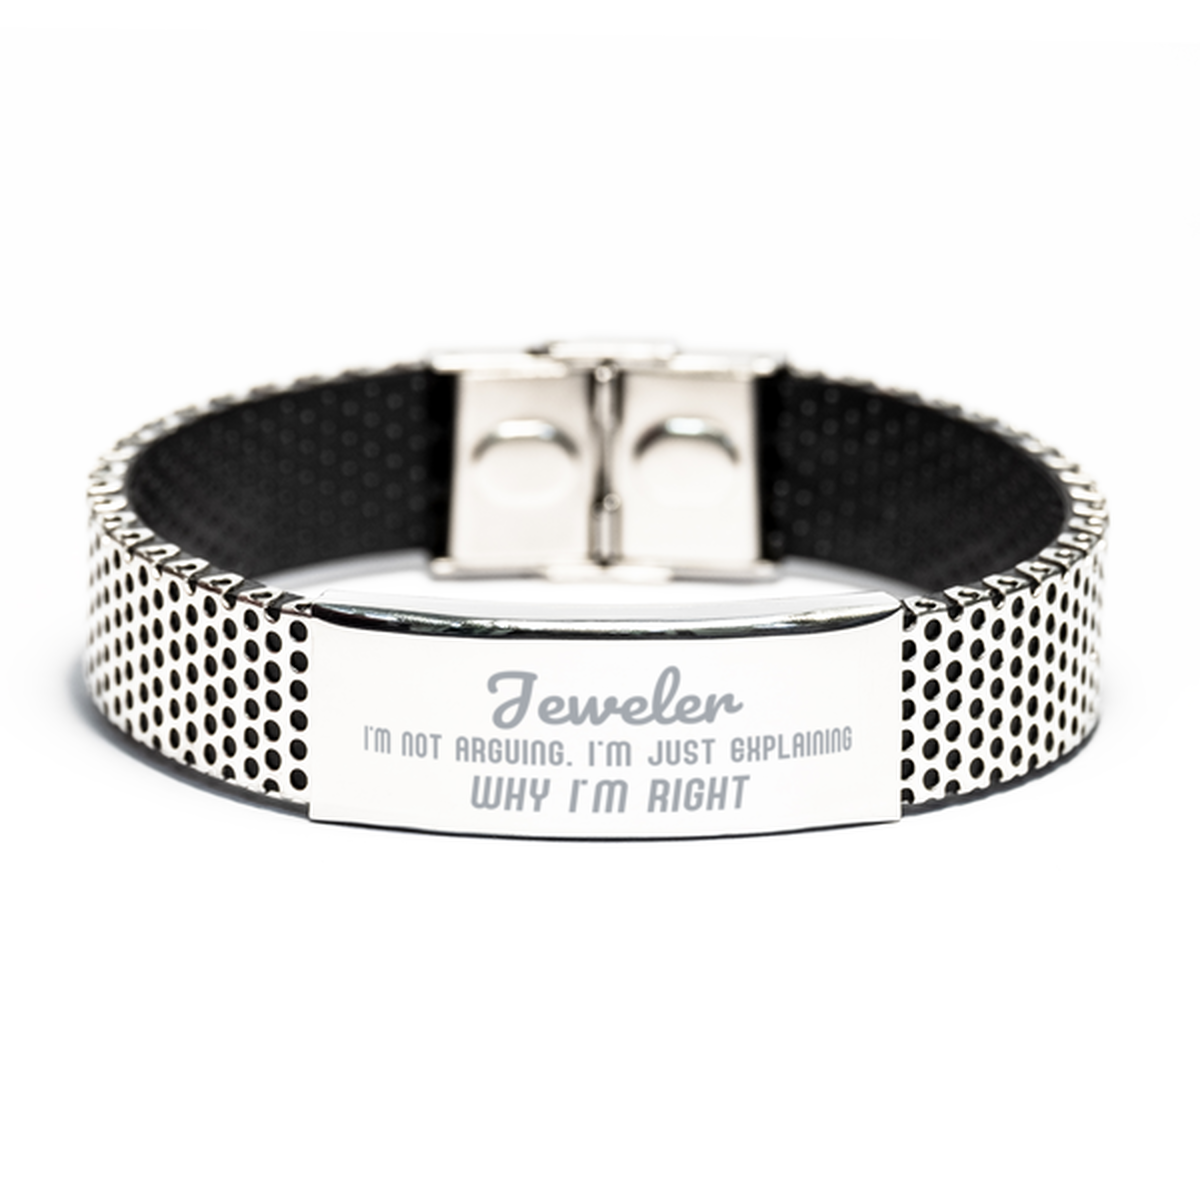 Jeweler I'm not Arguing. I'm Just Explaining Why I'm RIGHT Stainless Steel Bracelet, Funny Saying Quote Jeweler Gifts For Jeweler Graduation Birthday Christmas Gifts for Men Women Coworker